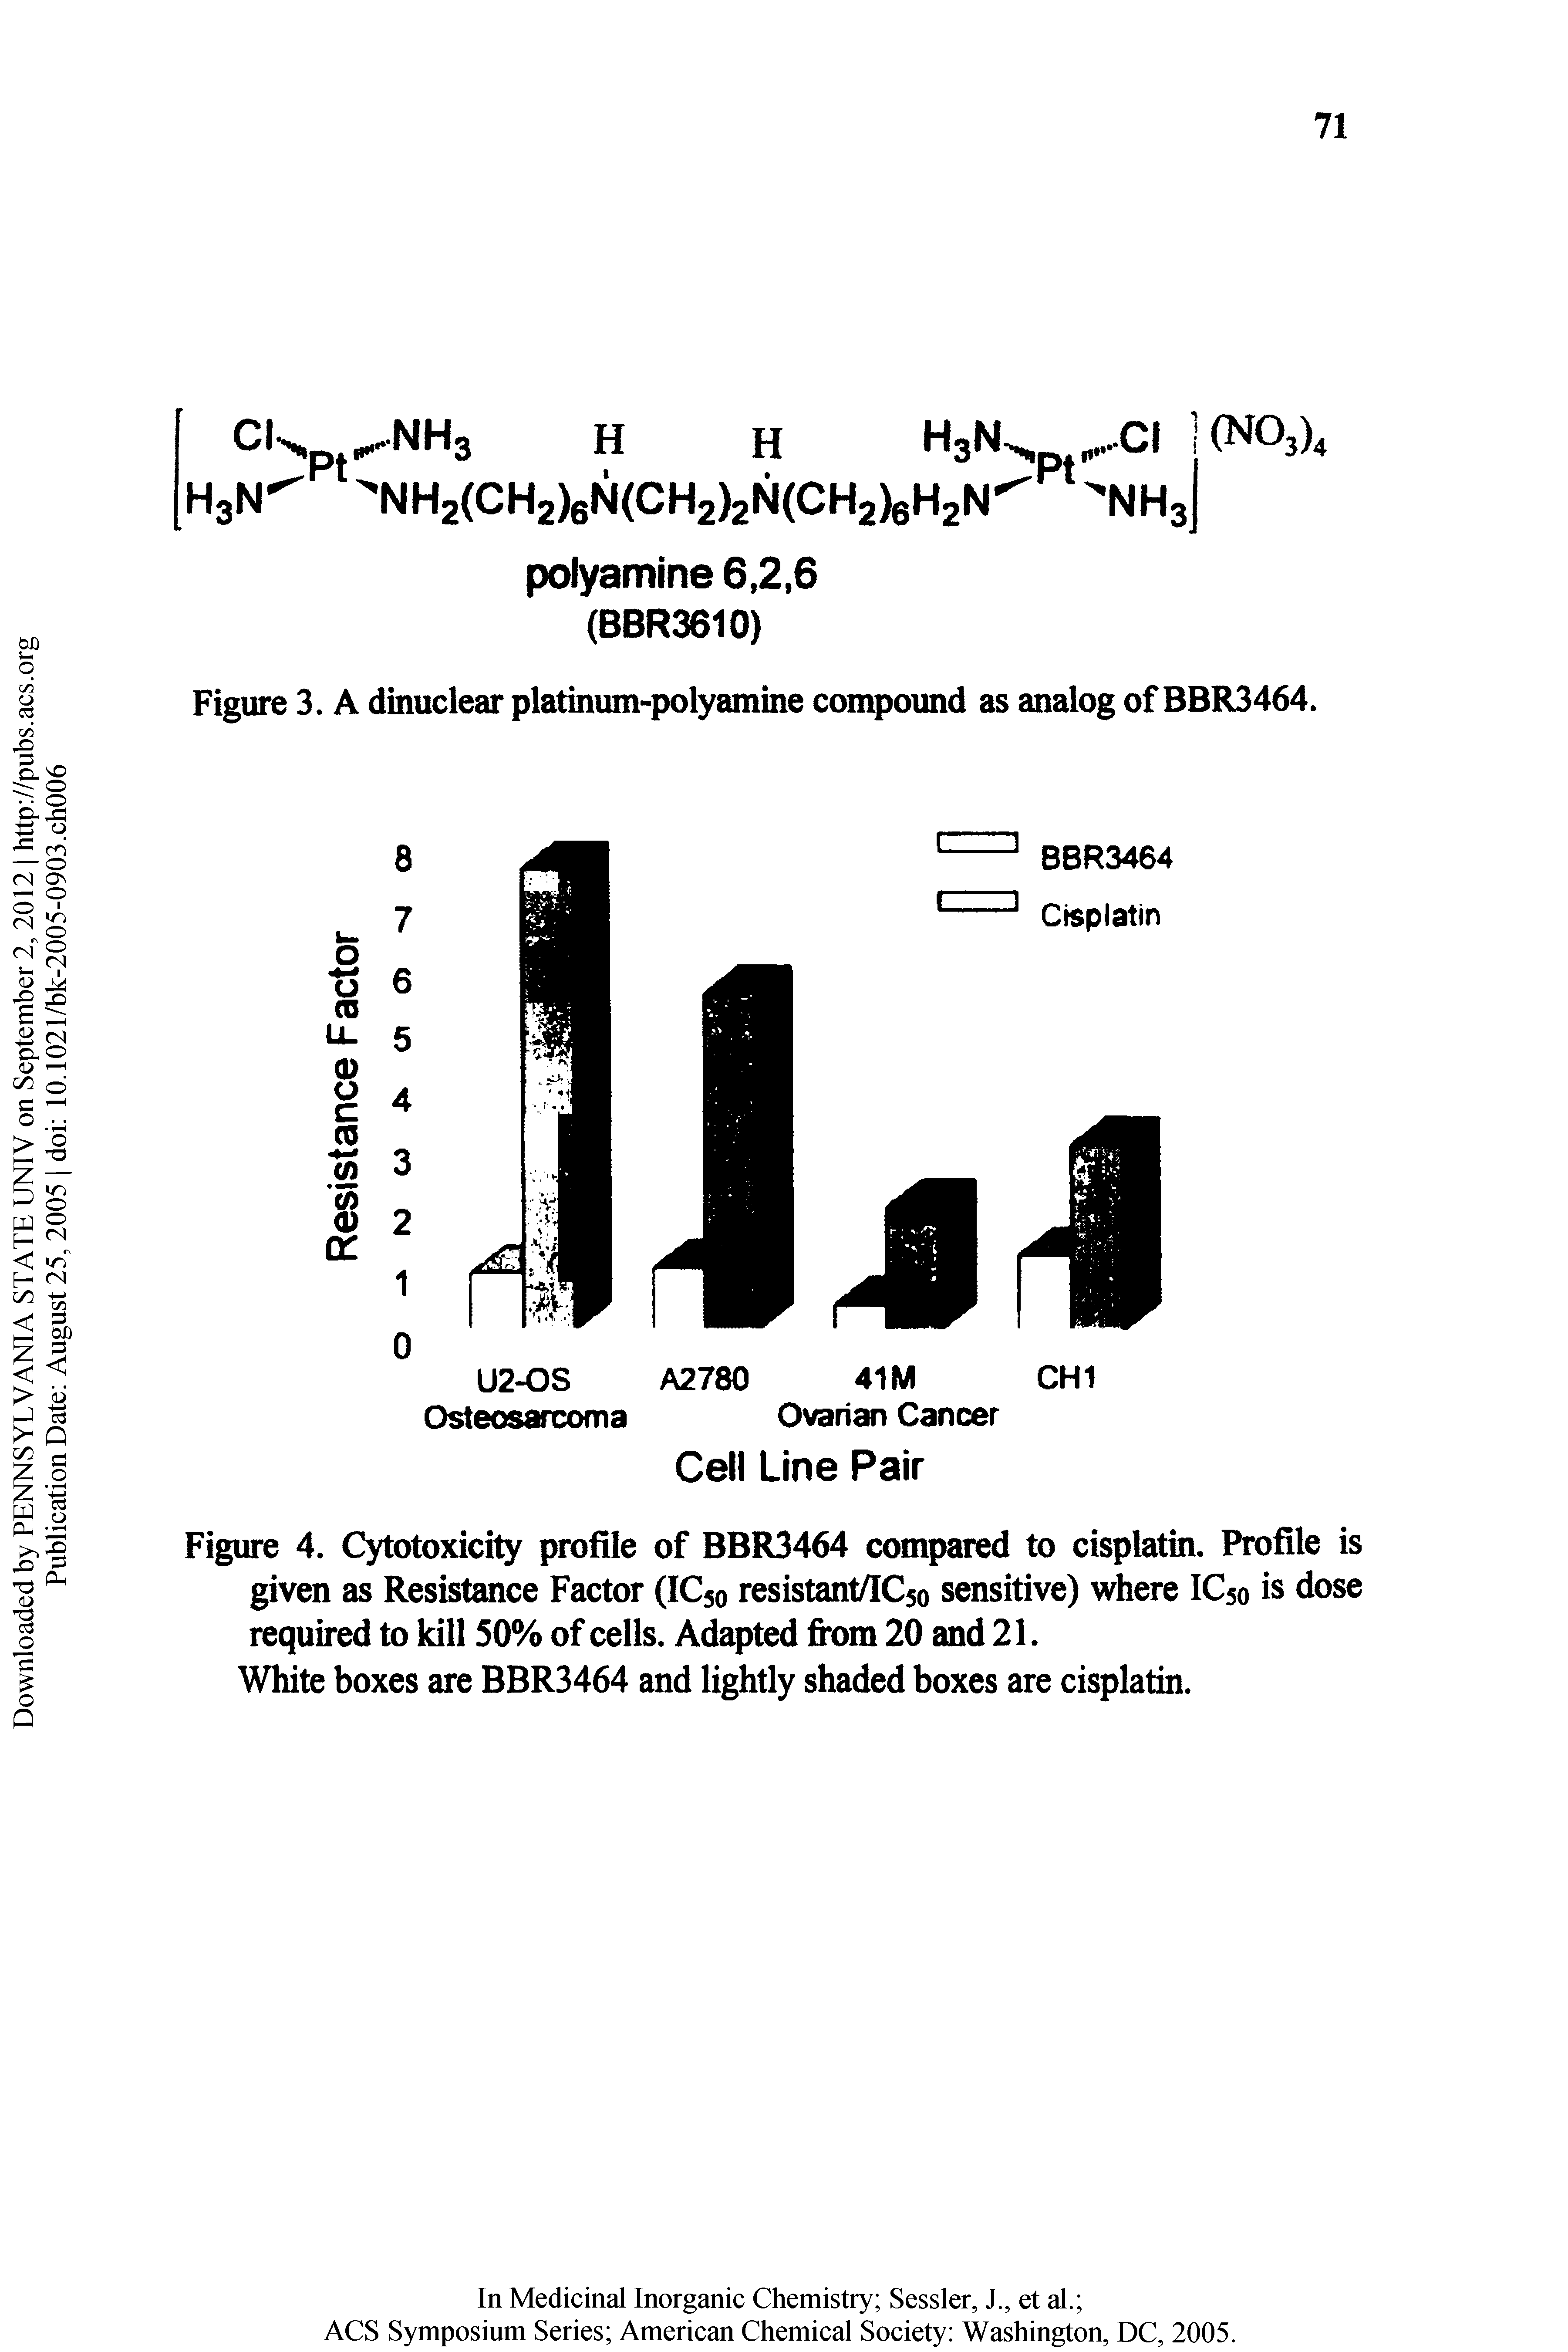 Figure 3. A dinuclear platinum-polyamine compound as analog of BBR3464.